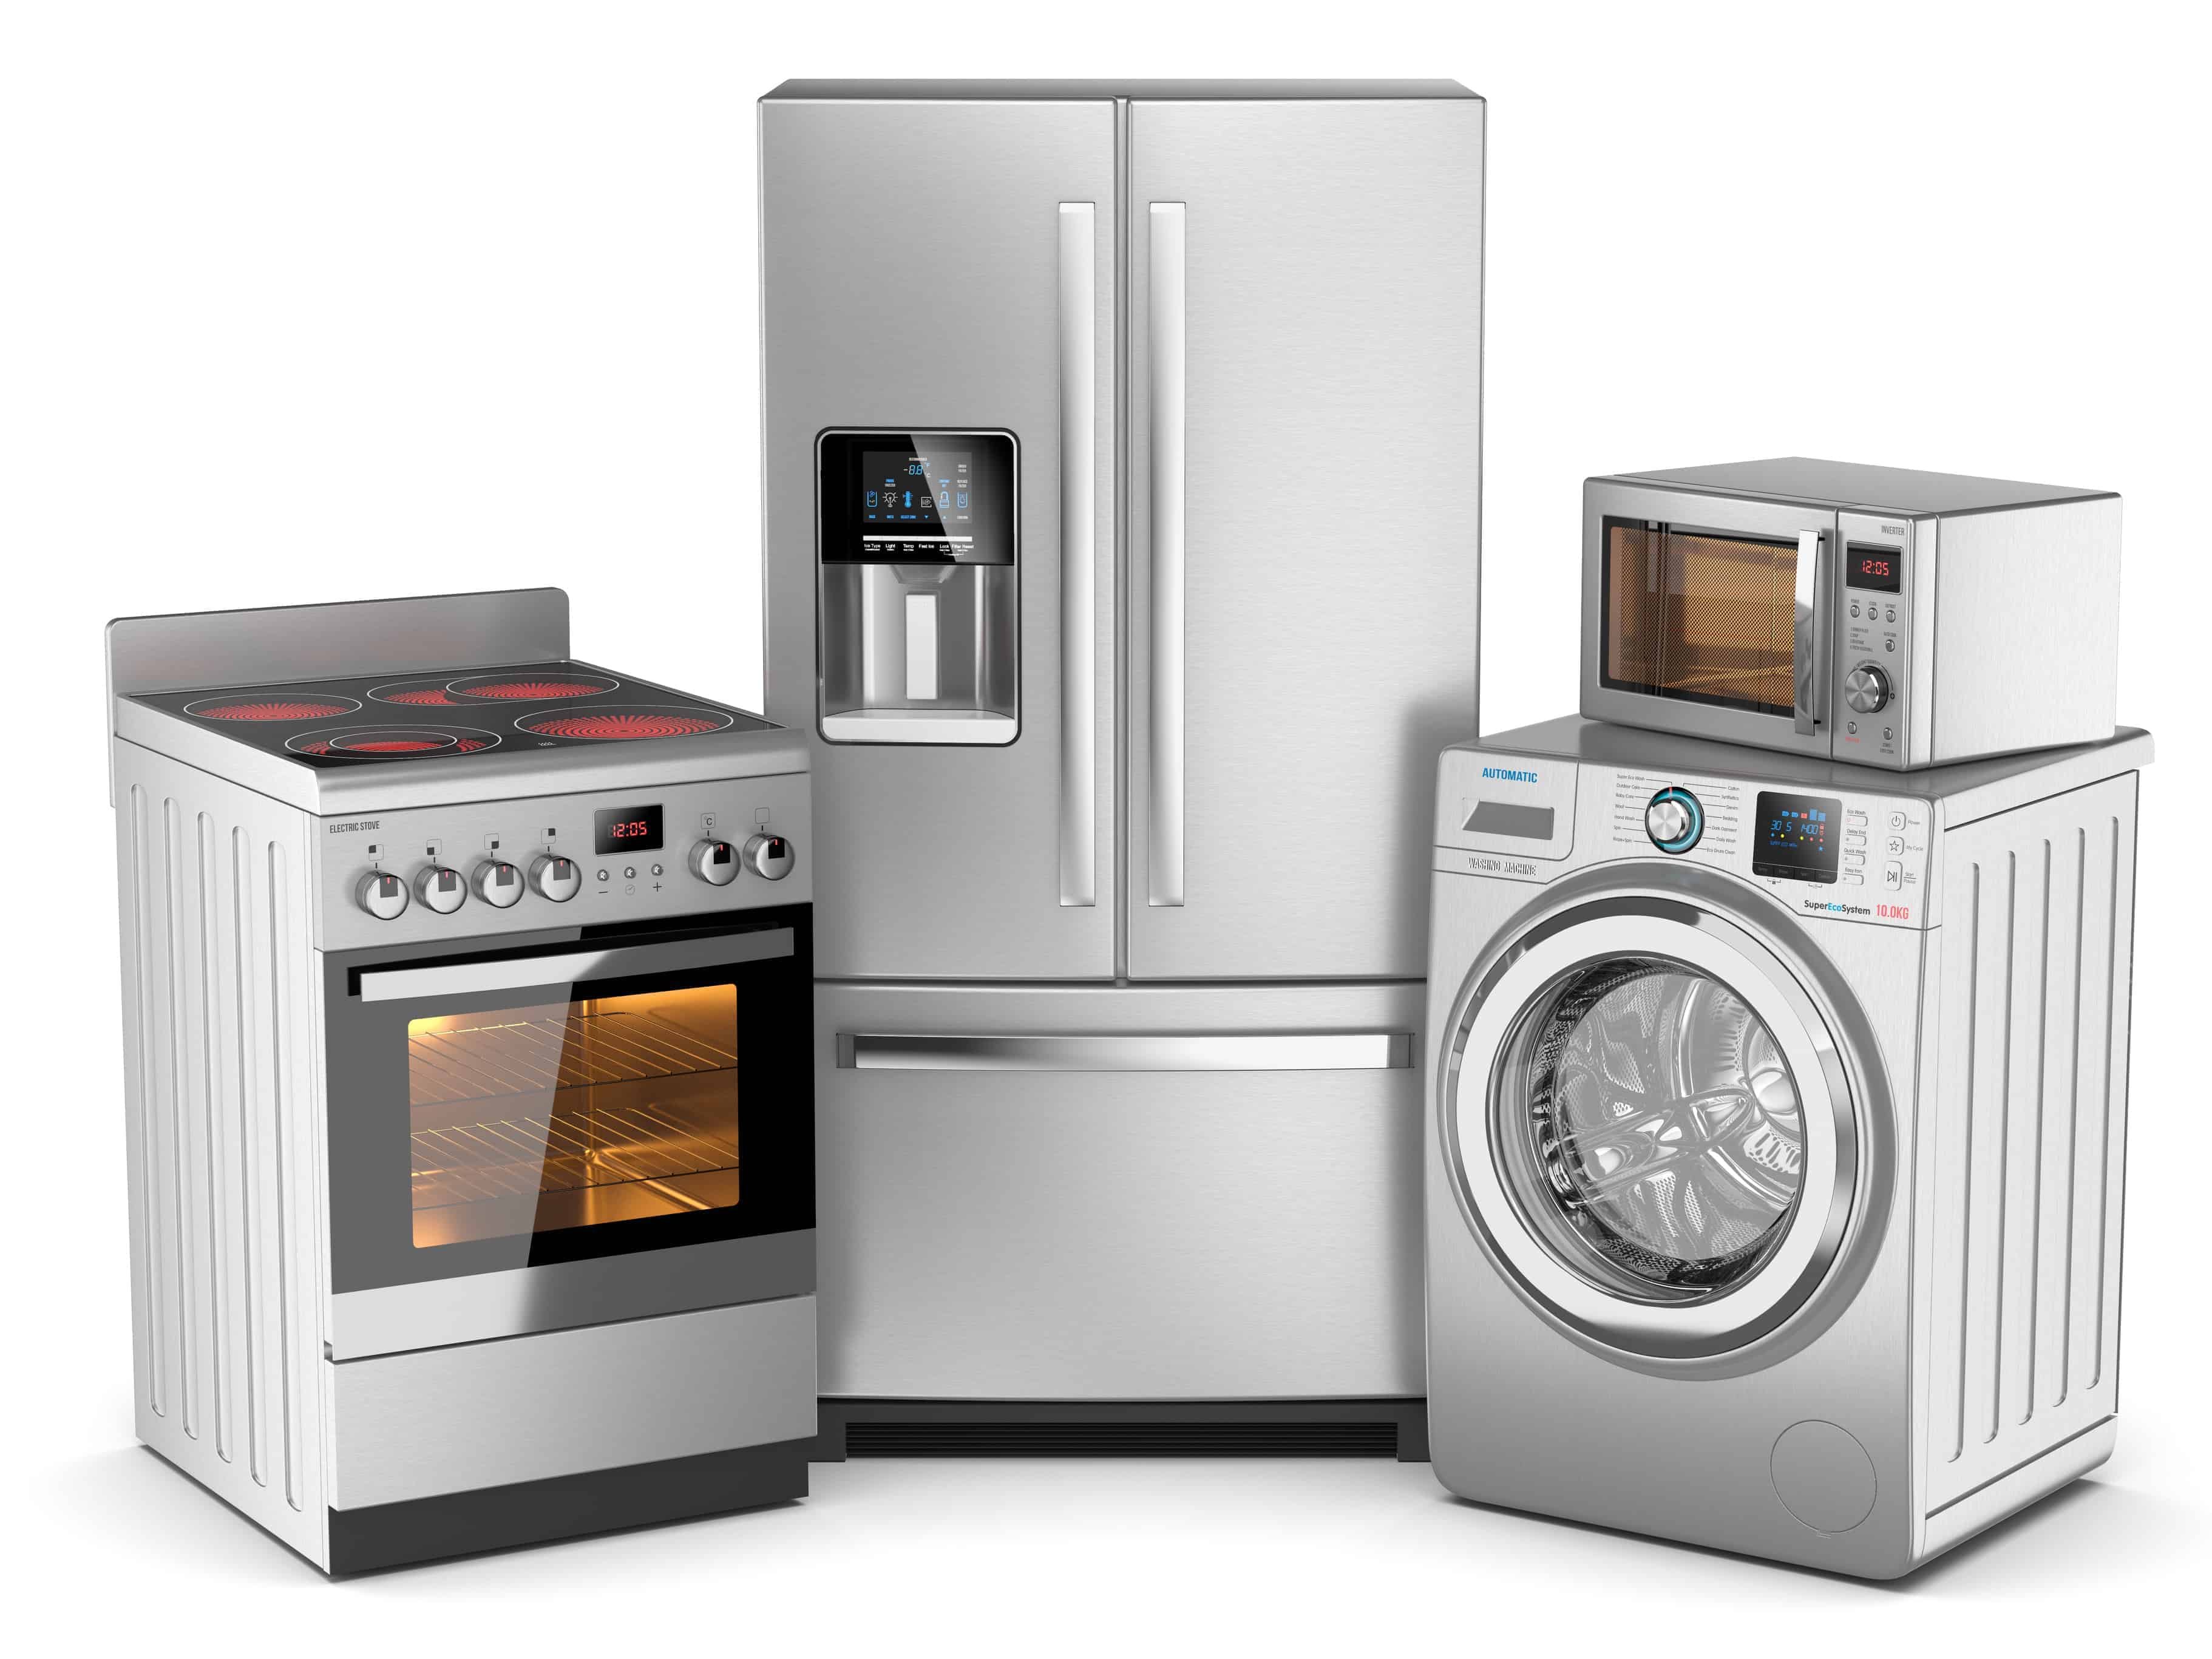 Repairing Your Appliances Instead of Replacing Them